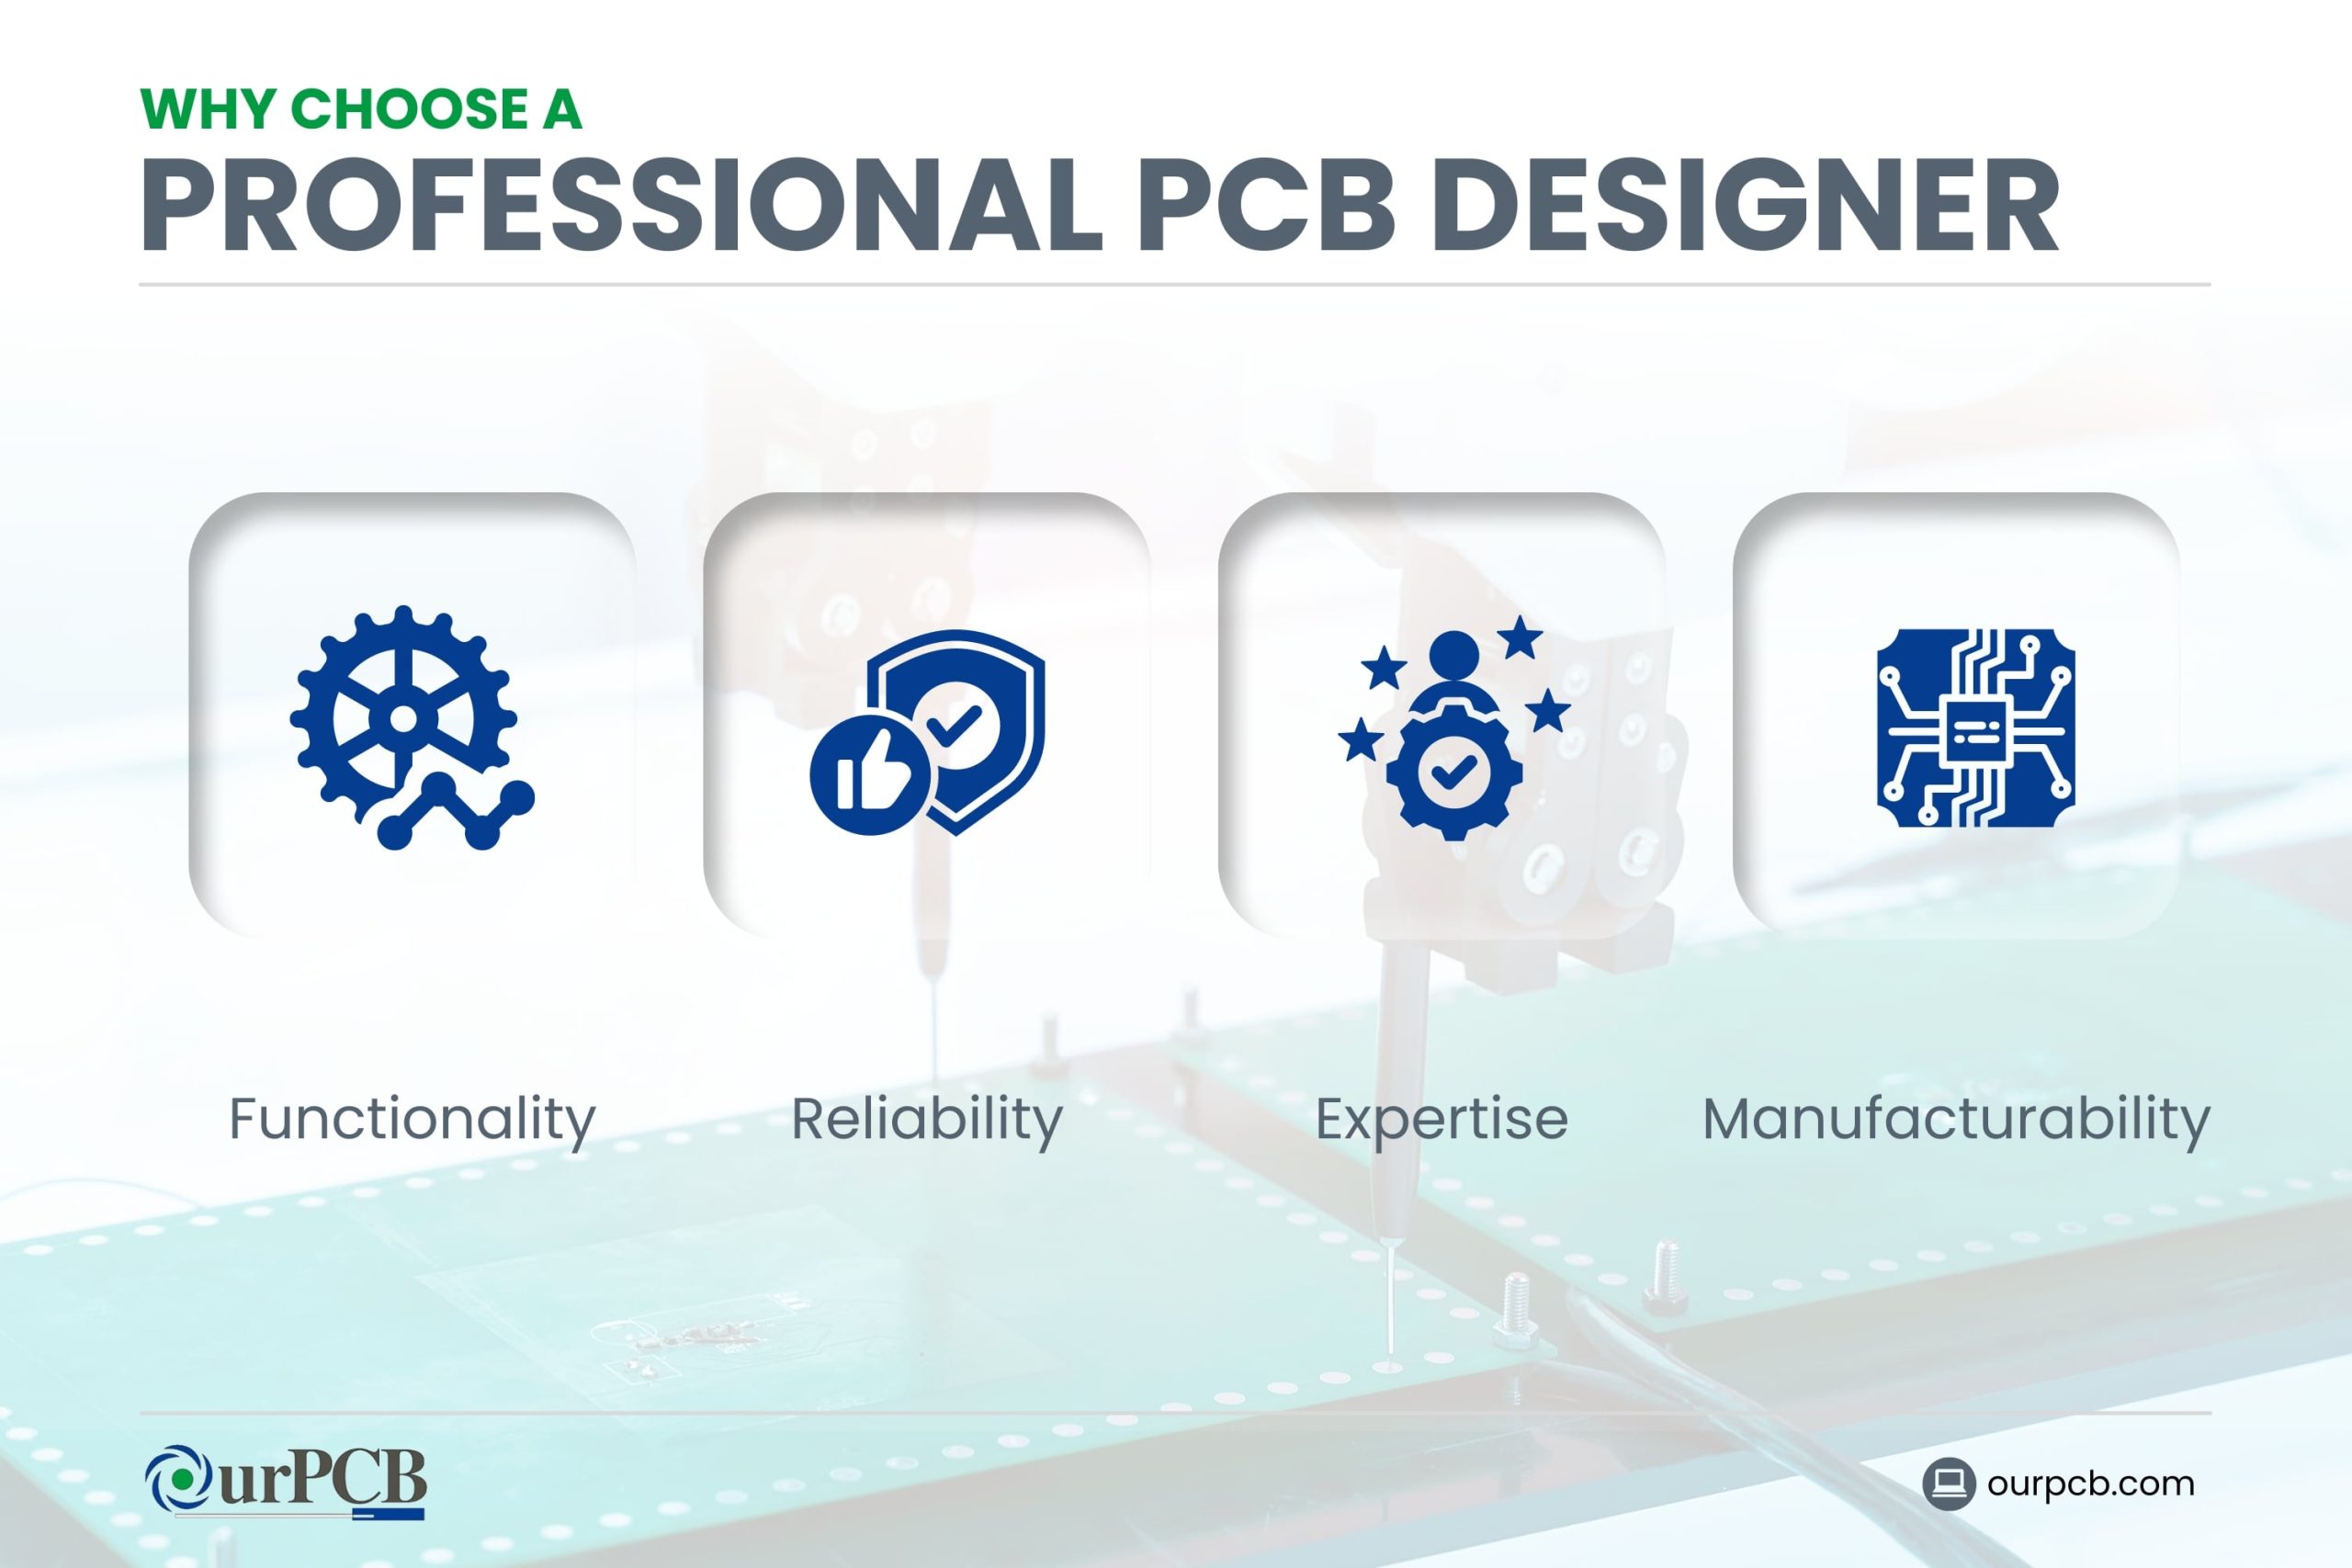 Why Does Professional PCB Design Matter?